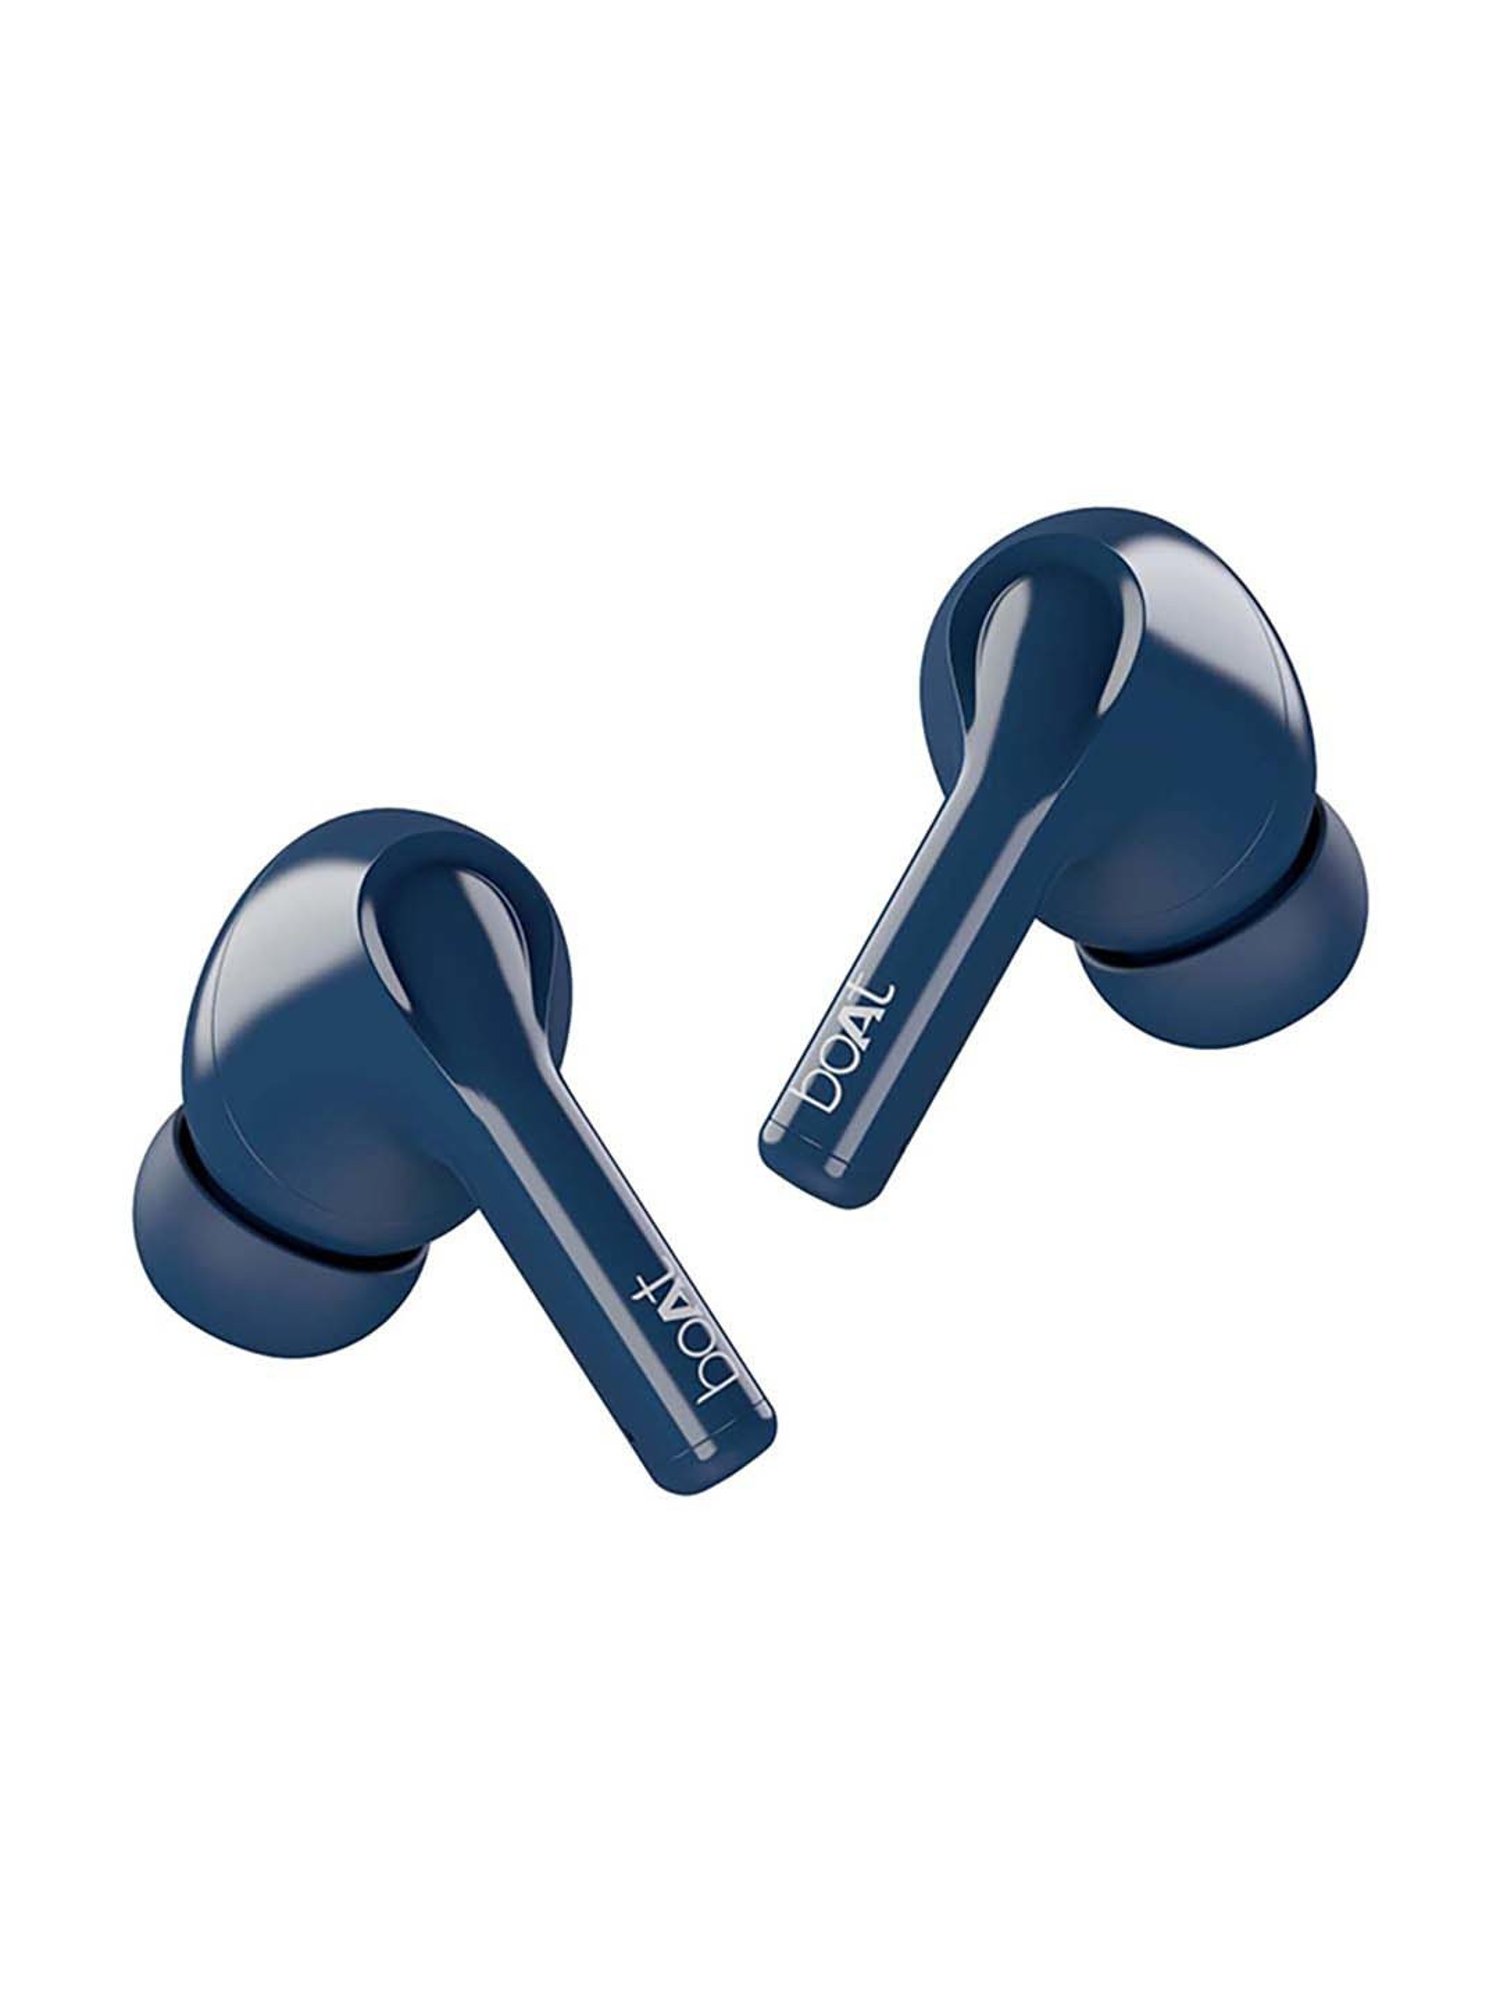 Buy boAt TWS Airdopes 161 Wireless Earbuds, Electric Blue at Reliance  Digital